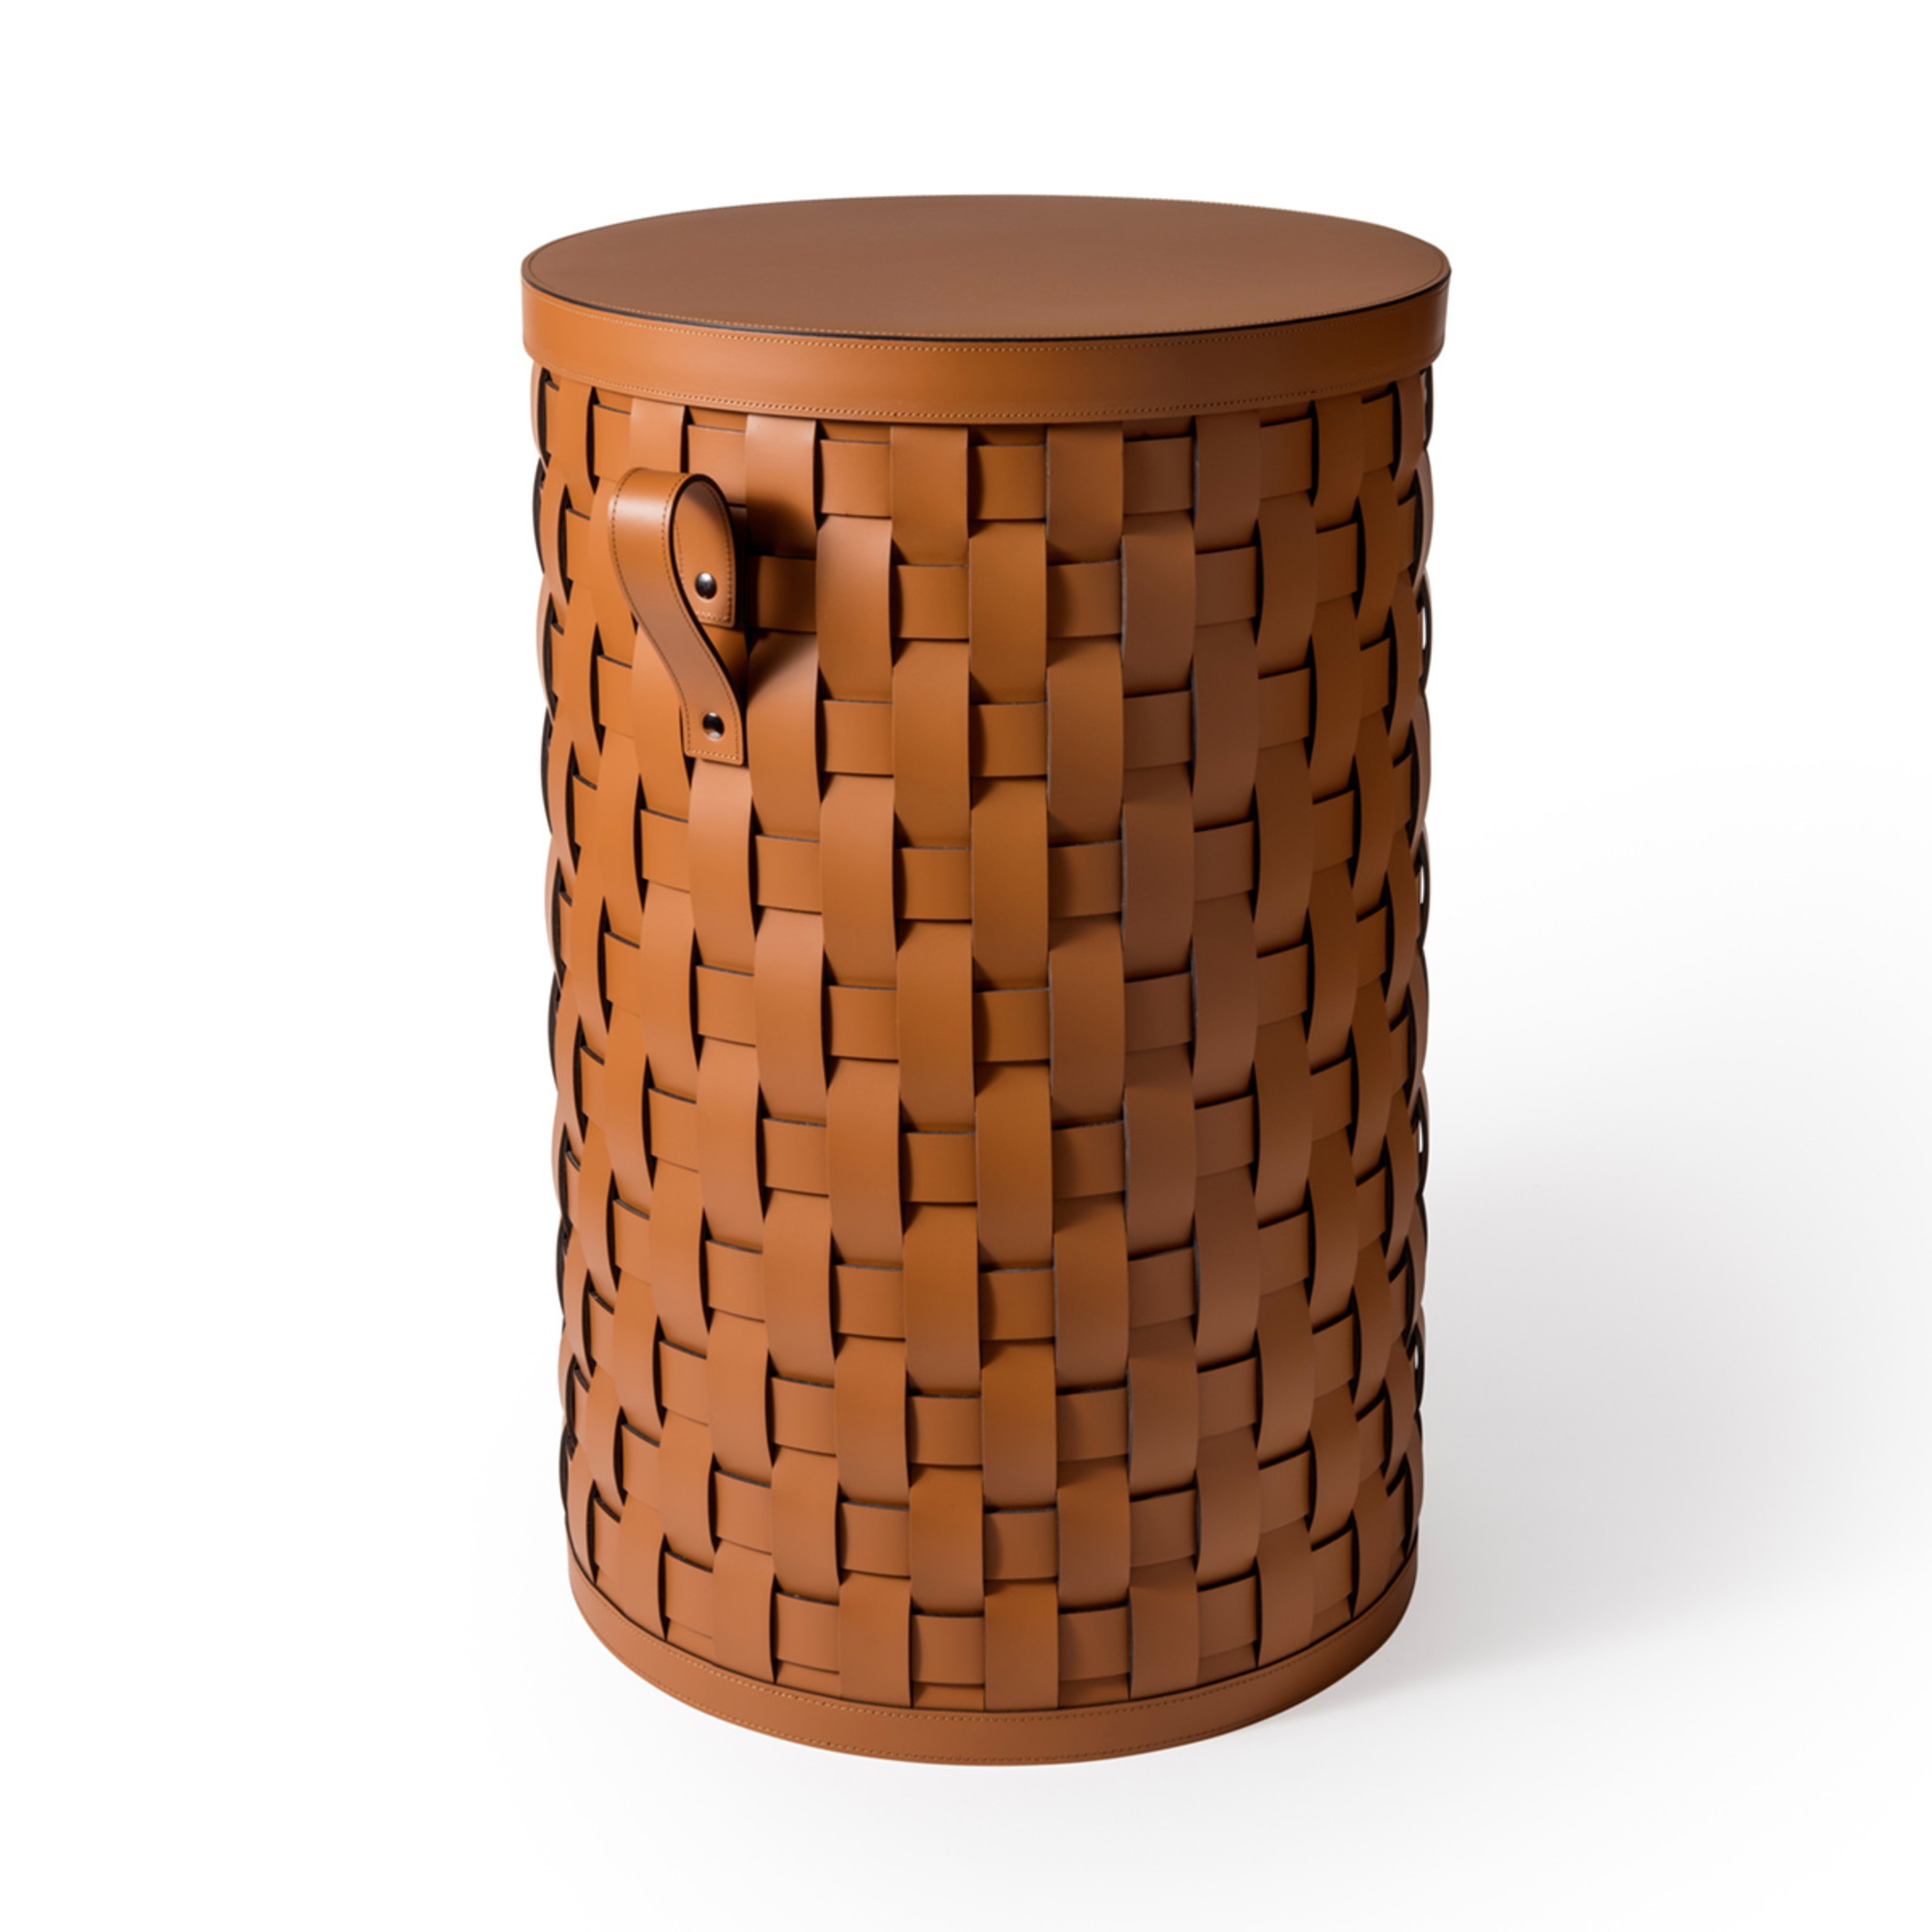 Leather Round Storage Basket  Round leather, Next day delivery